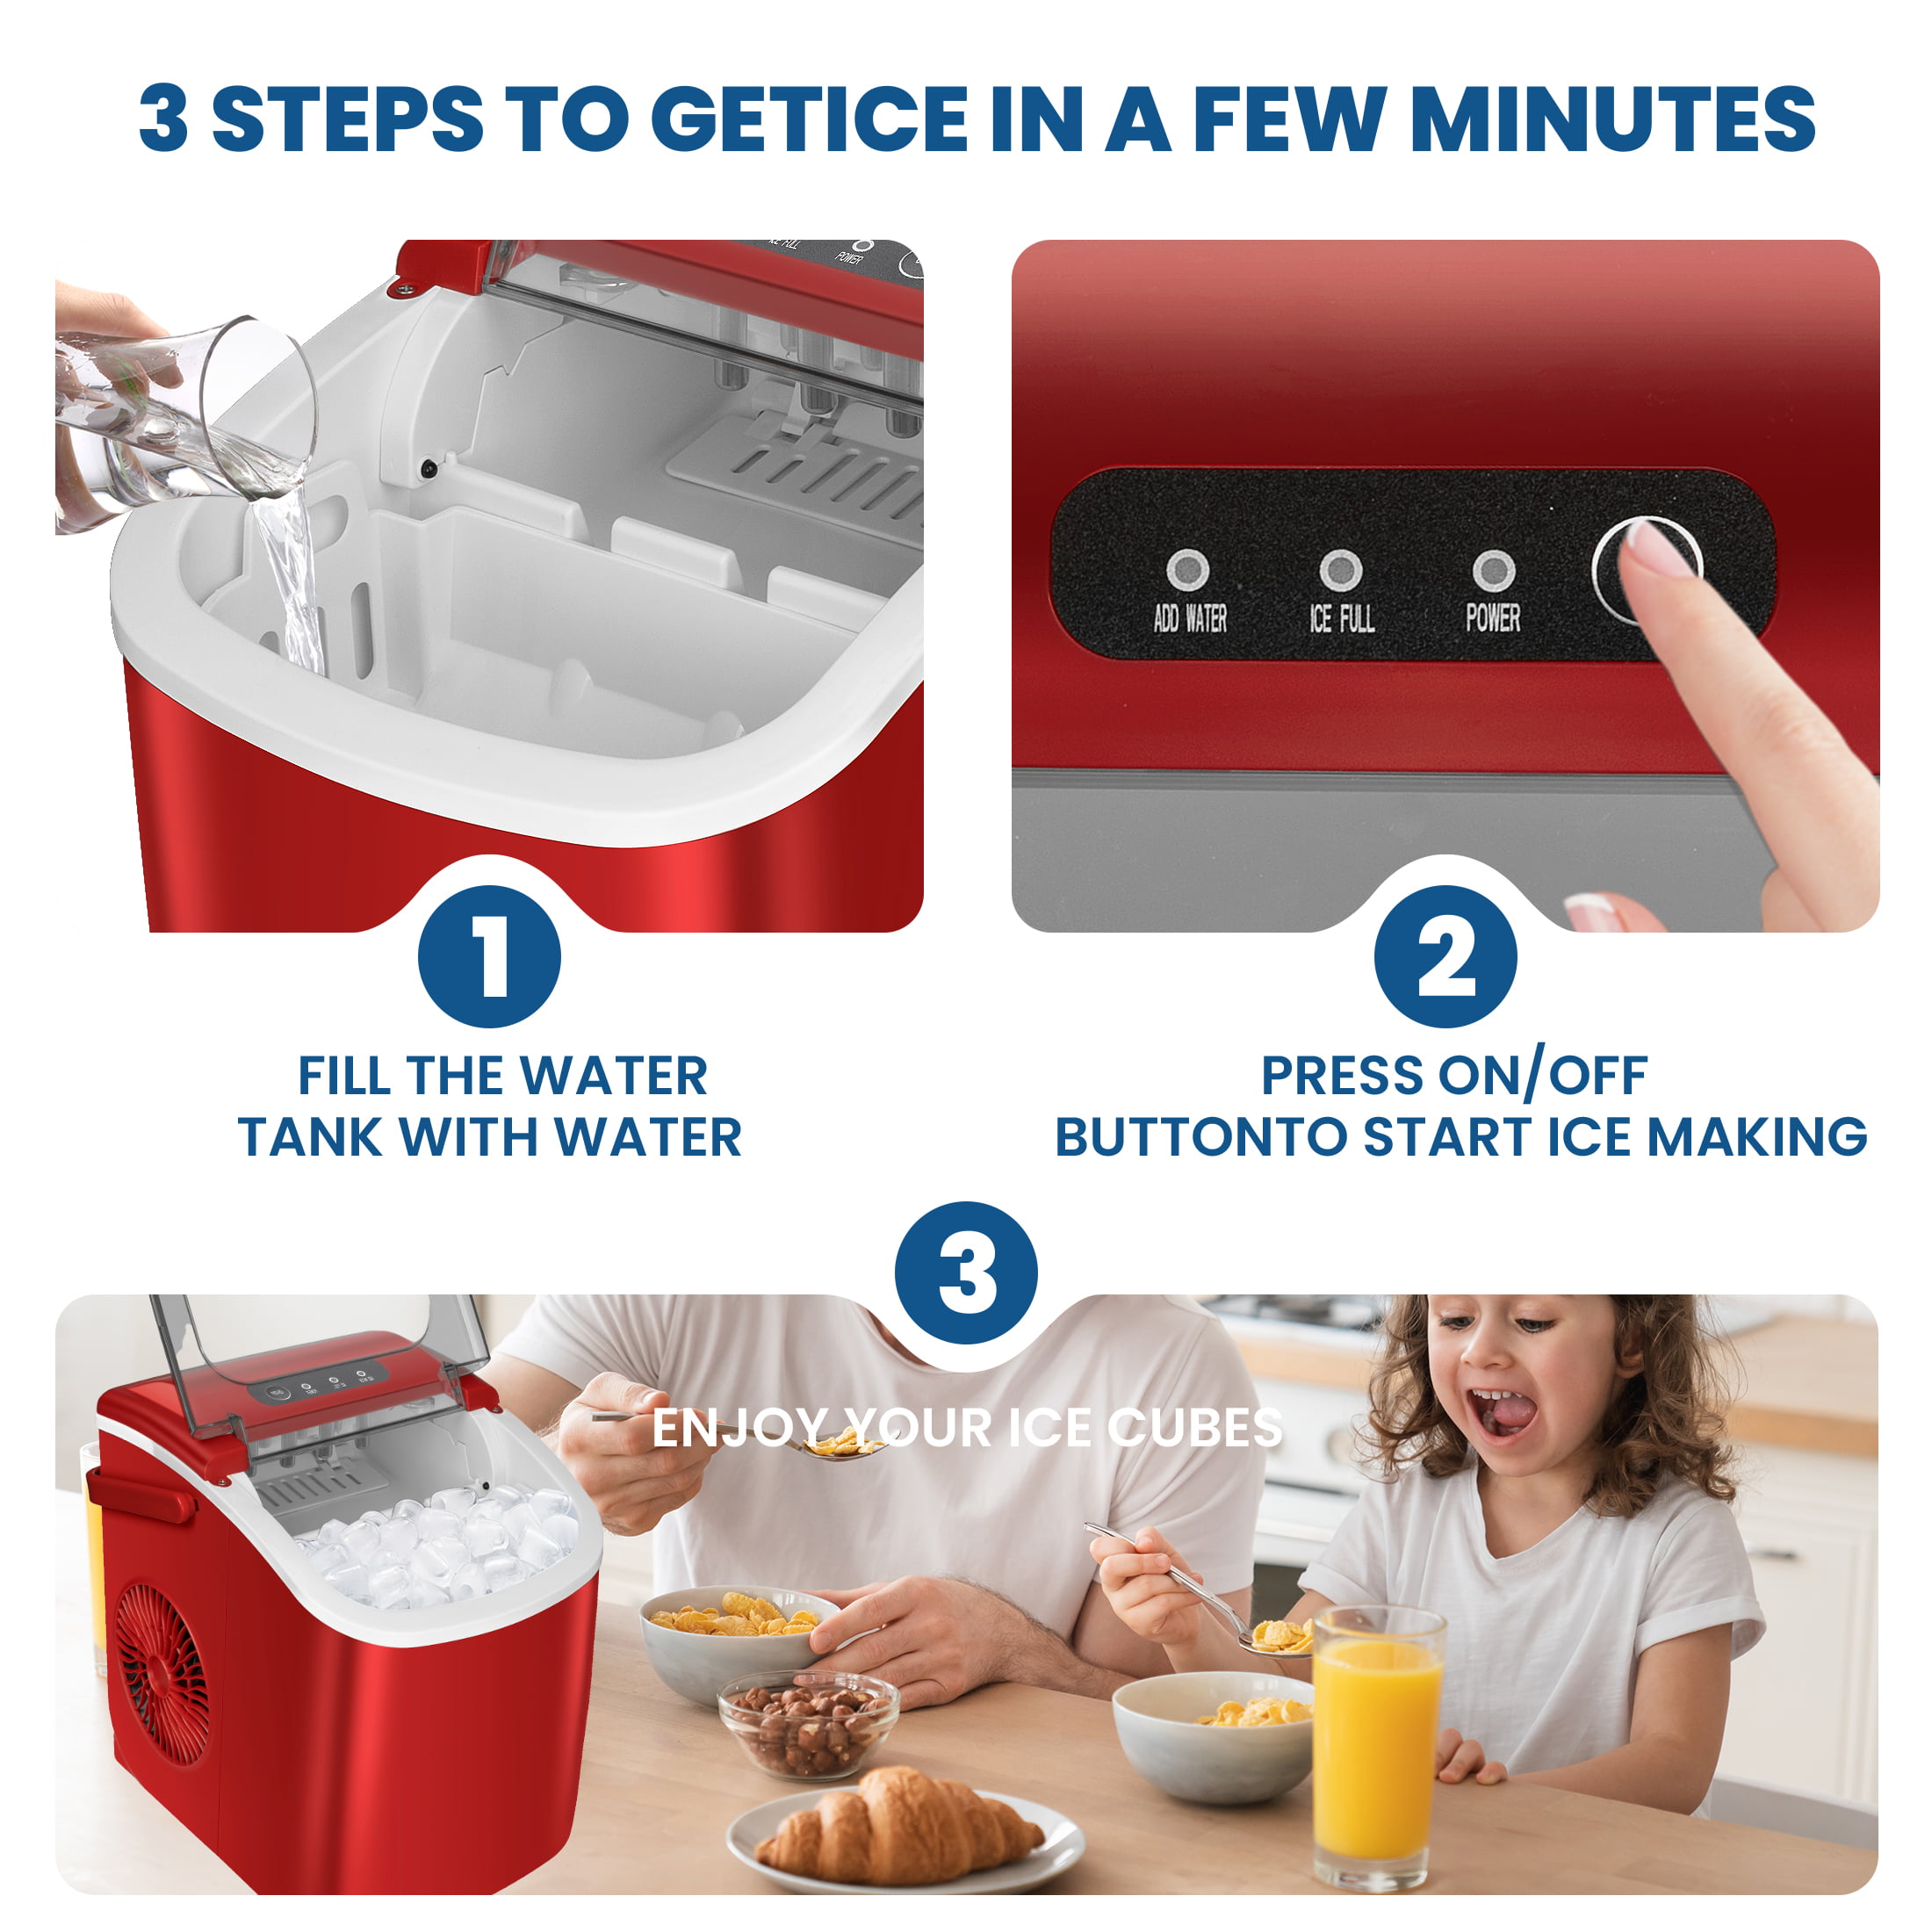 KISSAIR Portable Ice Maker Countertop, 9Pcs/8Mins, 26lbs/24H, Self-Cleaning  Ice Machine with Handle for Kitchen/Office/Bar/Party, Black